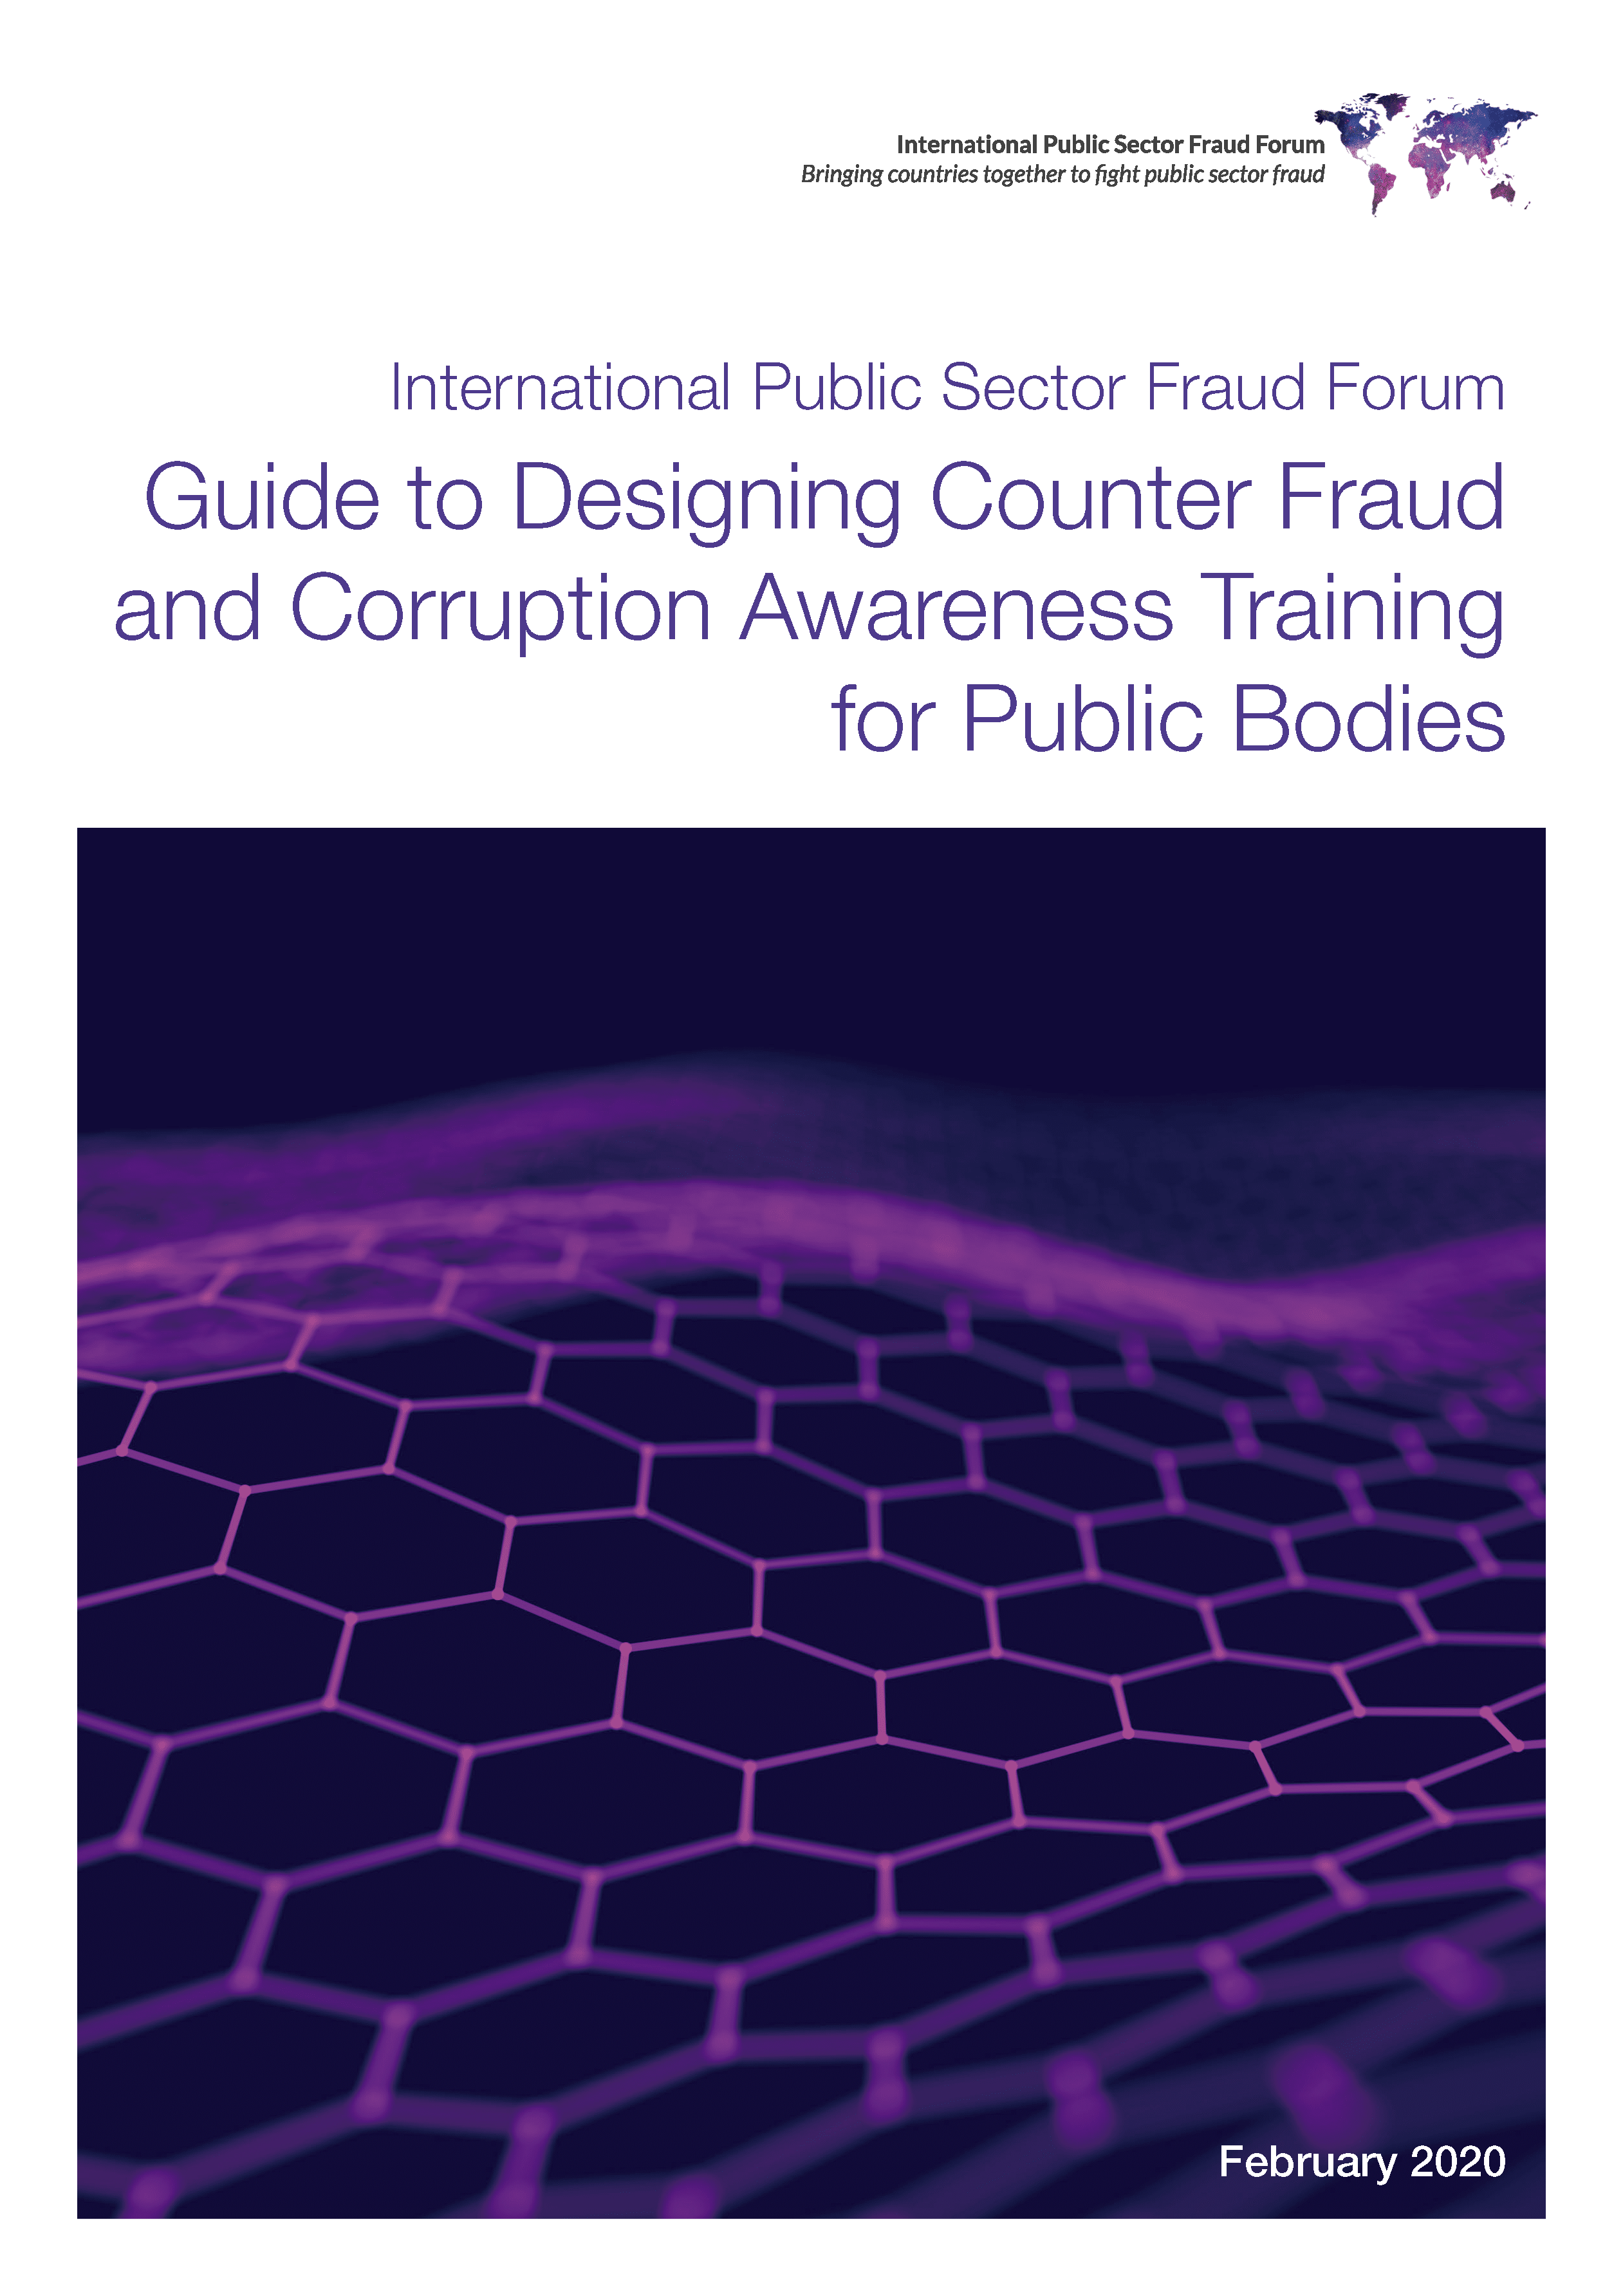 Guide to Designing Counter Fraud and Corruption Awareness Training for Public Bodies